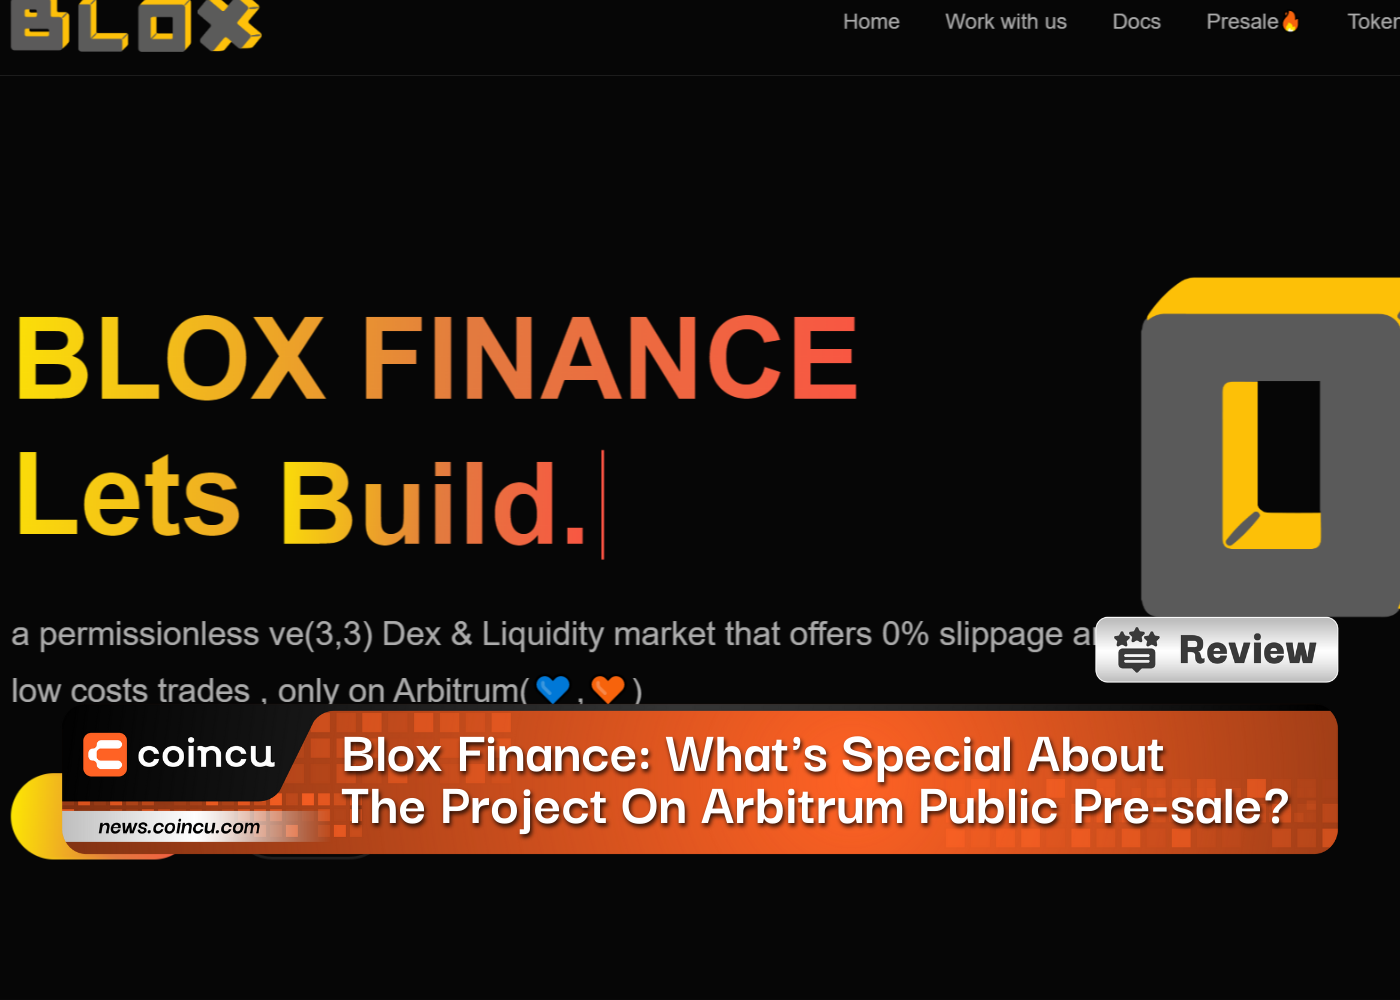 Blox Finance: What's Special About The Project On Arbitrum Public Pre-sale?